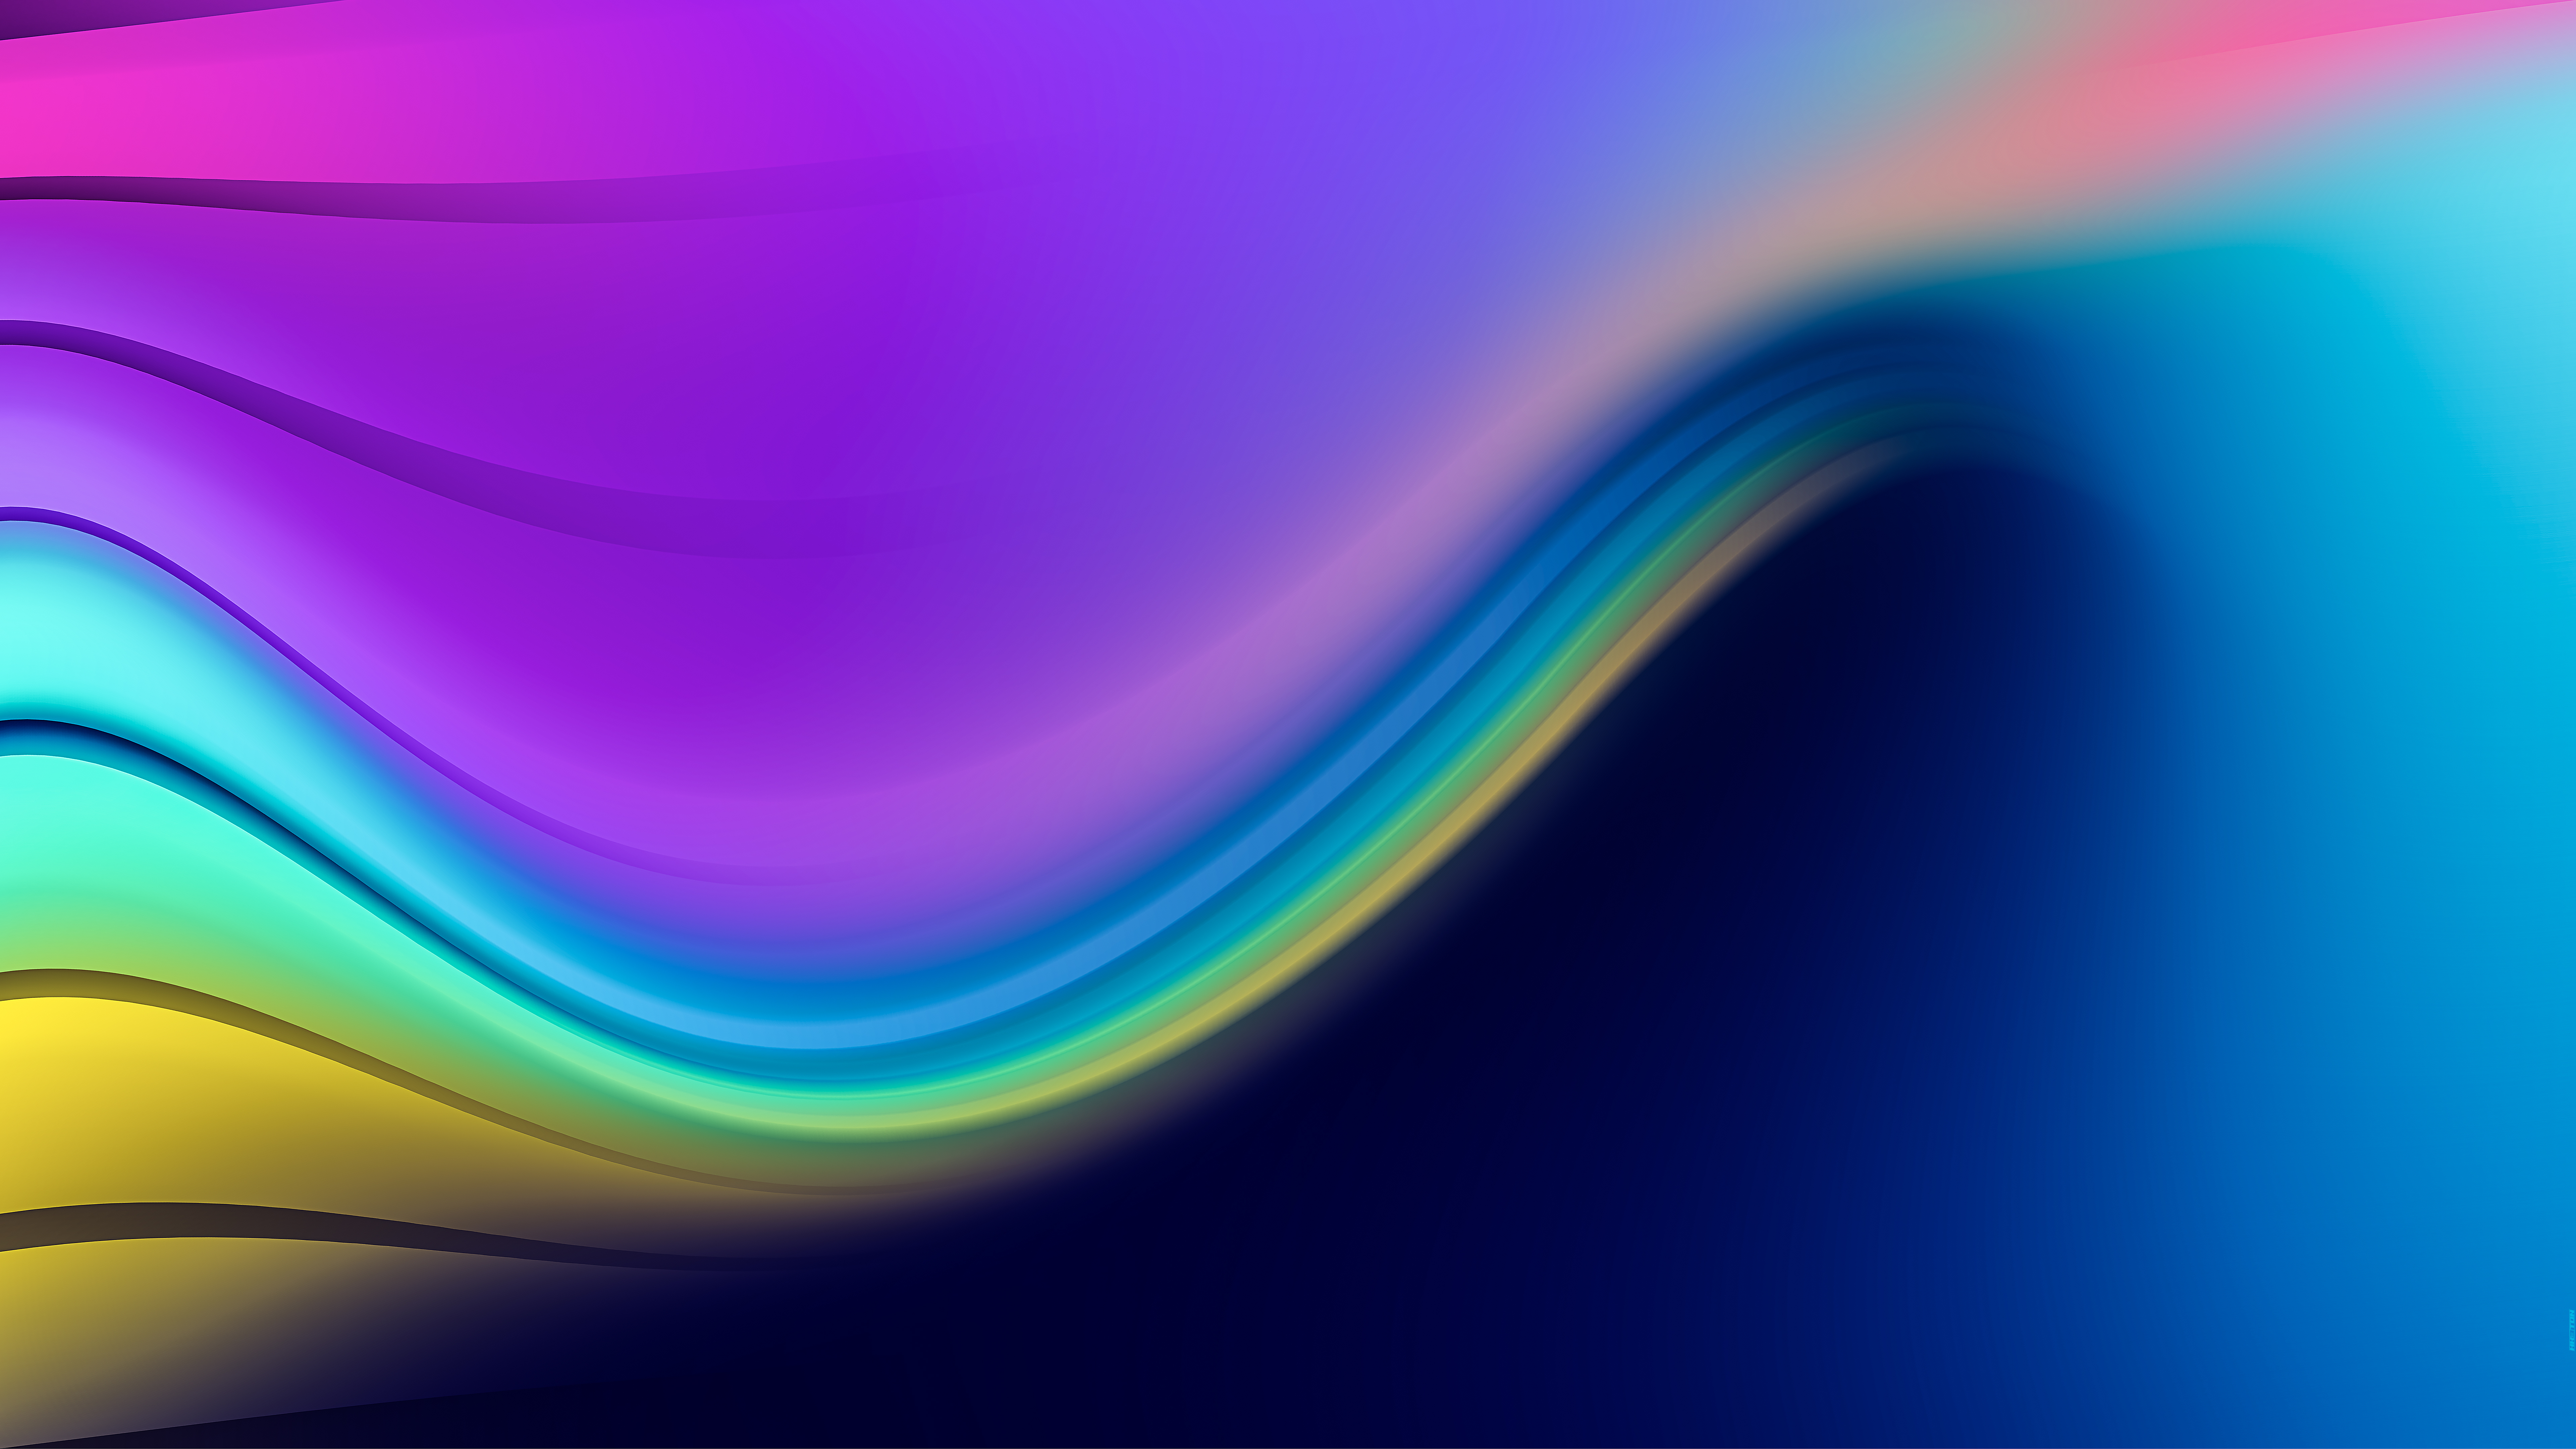 1080x234020 8k Gradient Wave 22 Art 1080x234020 Resolution Wallpaper, HD  Abstract 4K Wallpapers, Images, Photos and Background - Wallpapers Den